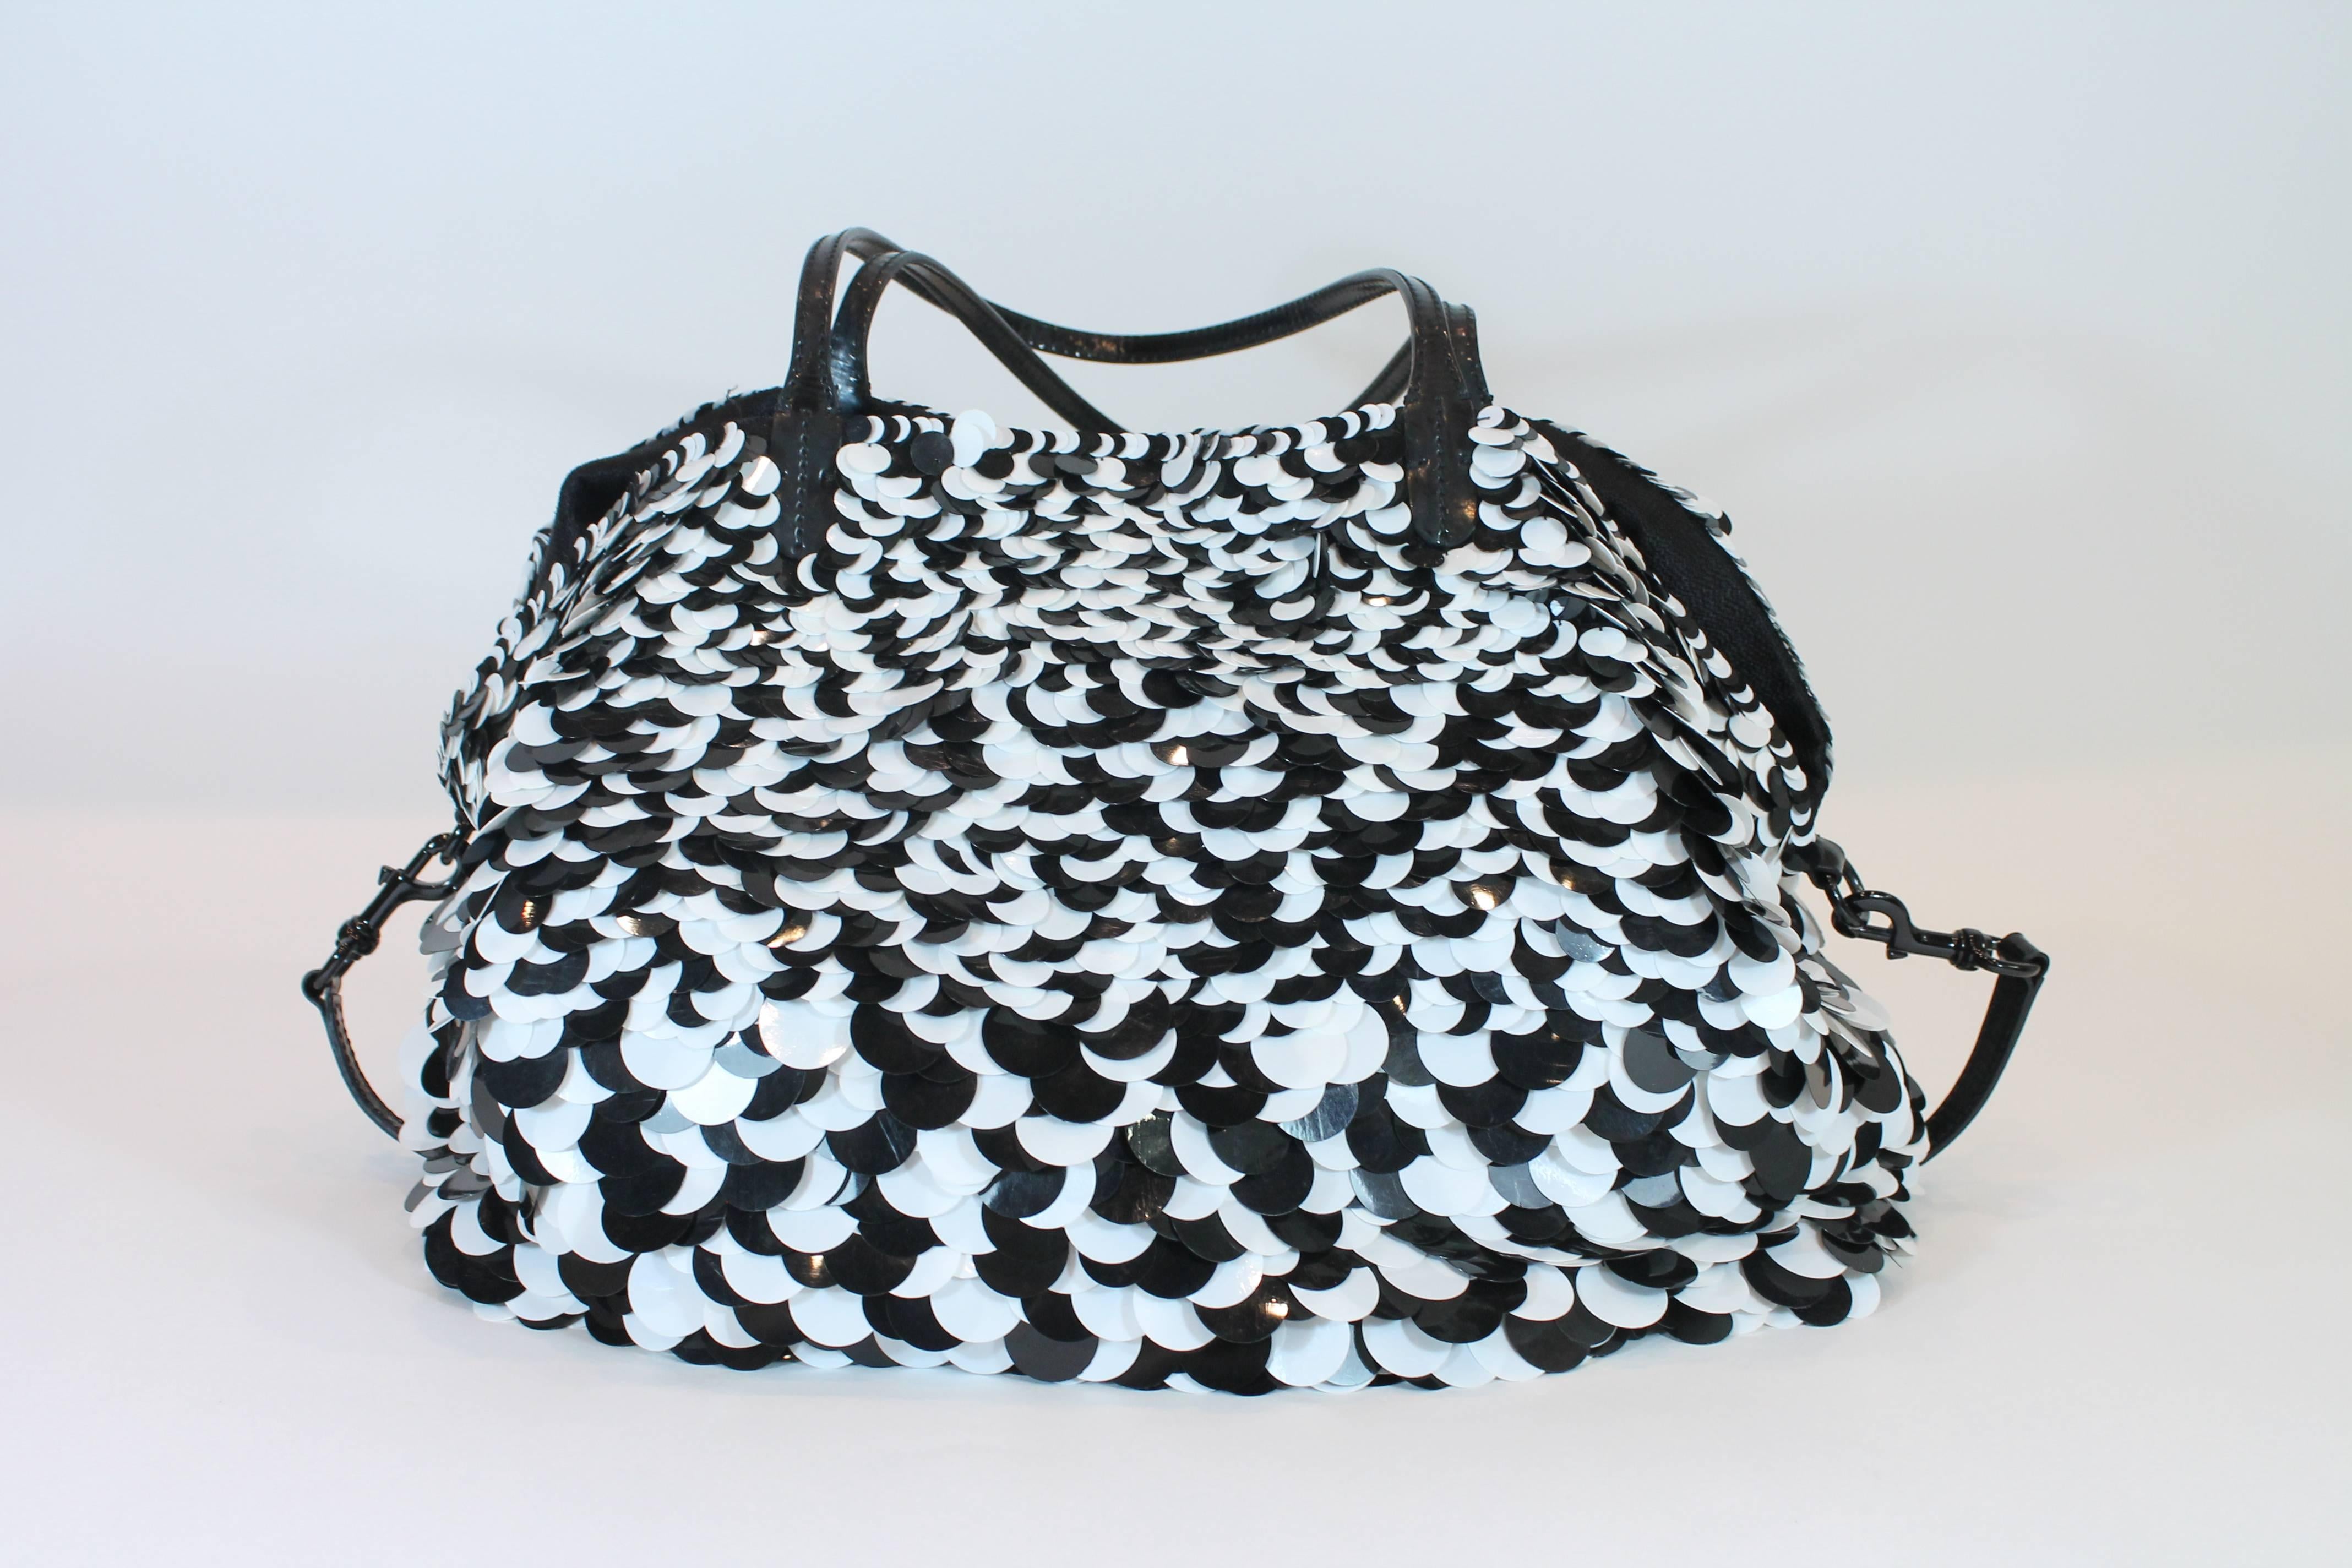 Black and white sequins in a variety of sizes.
Patent leather trim.
Dual top handles and removable shoulder strap.
Magnetic button closure.
One interior zippered pocket.
